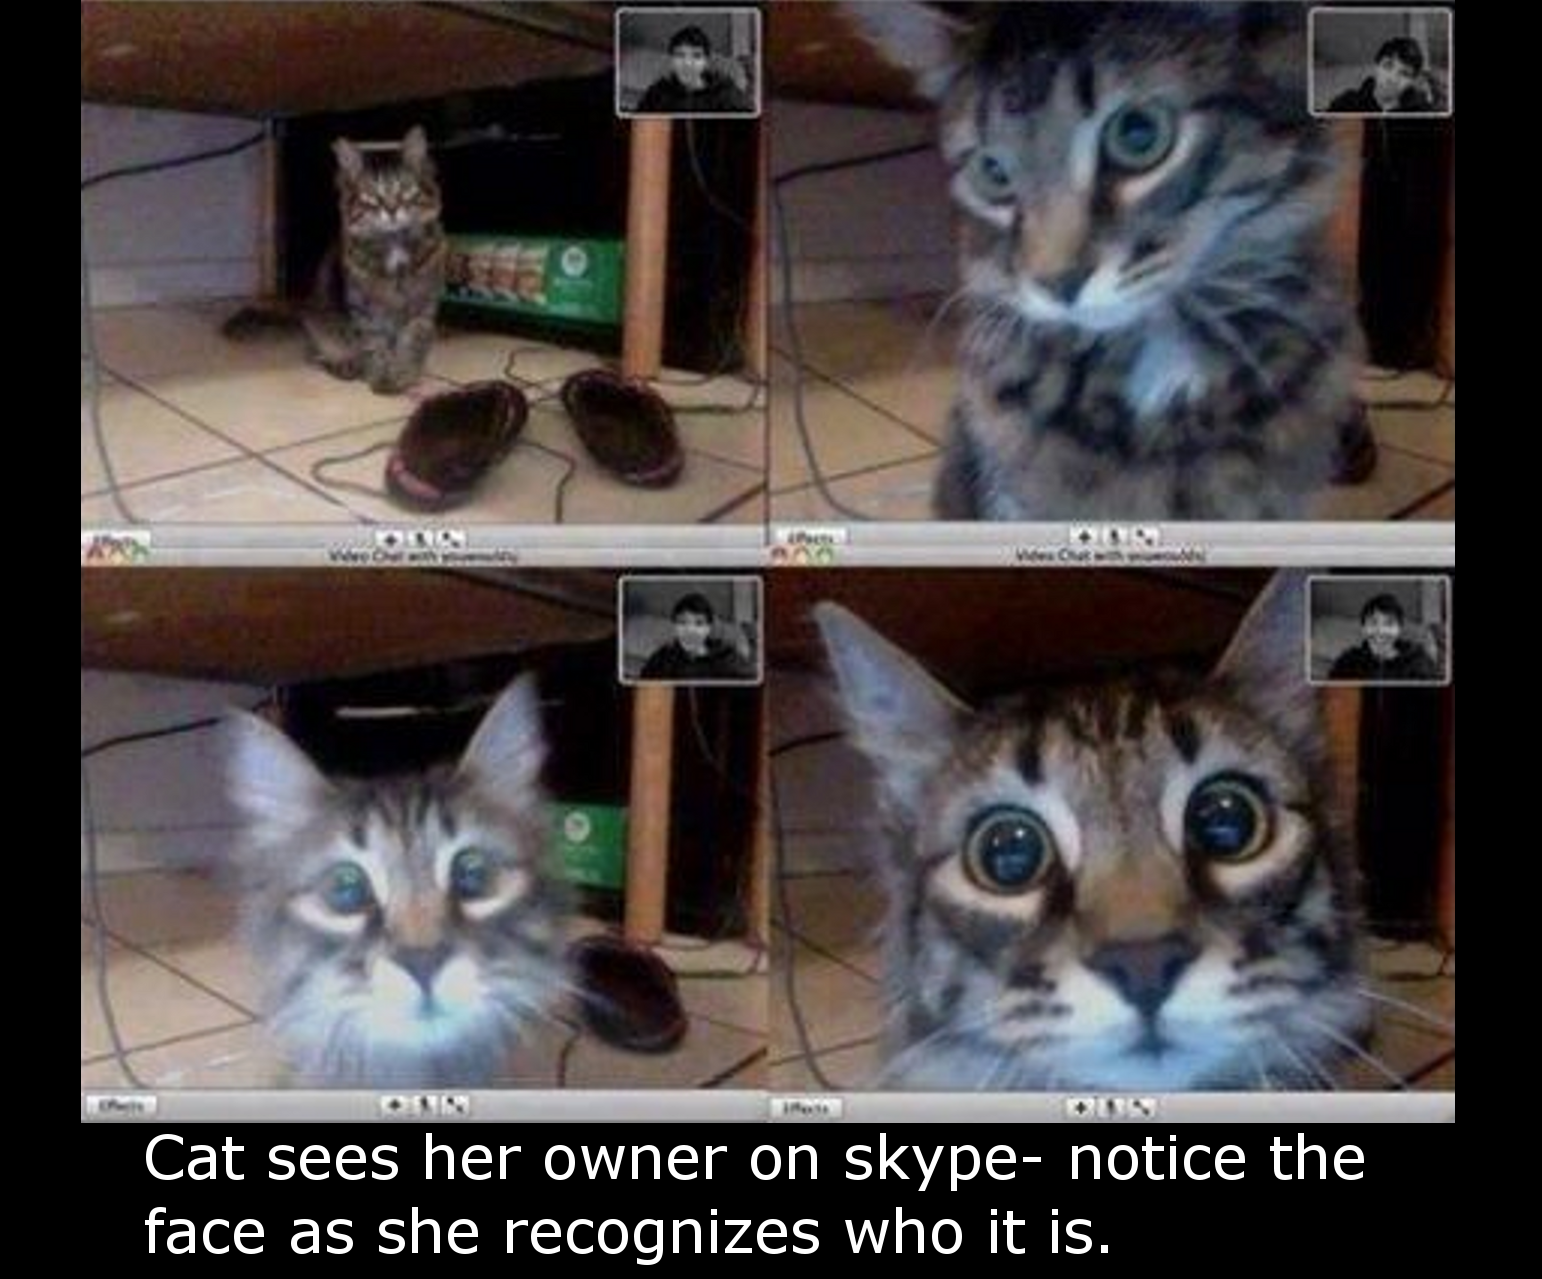 video chat funny - On Cat sees her owner on skype notice the face as she recognizes who it is.